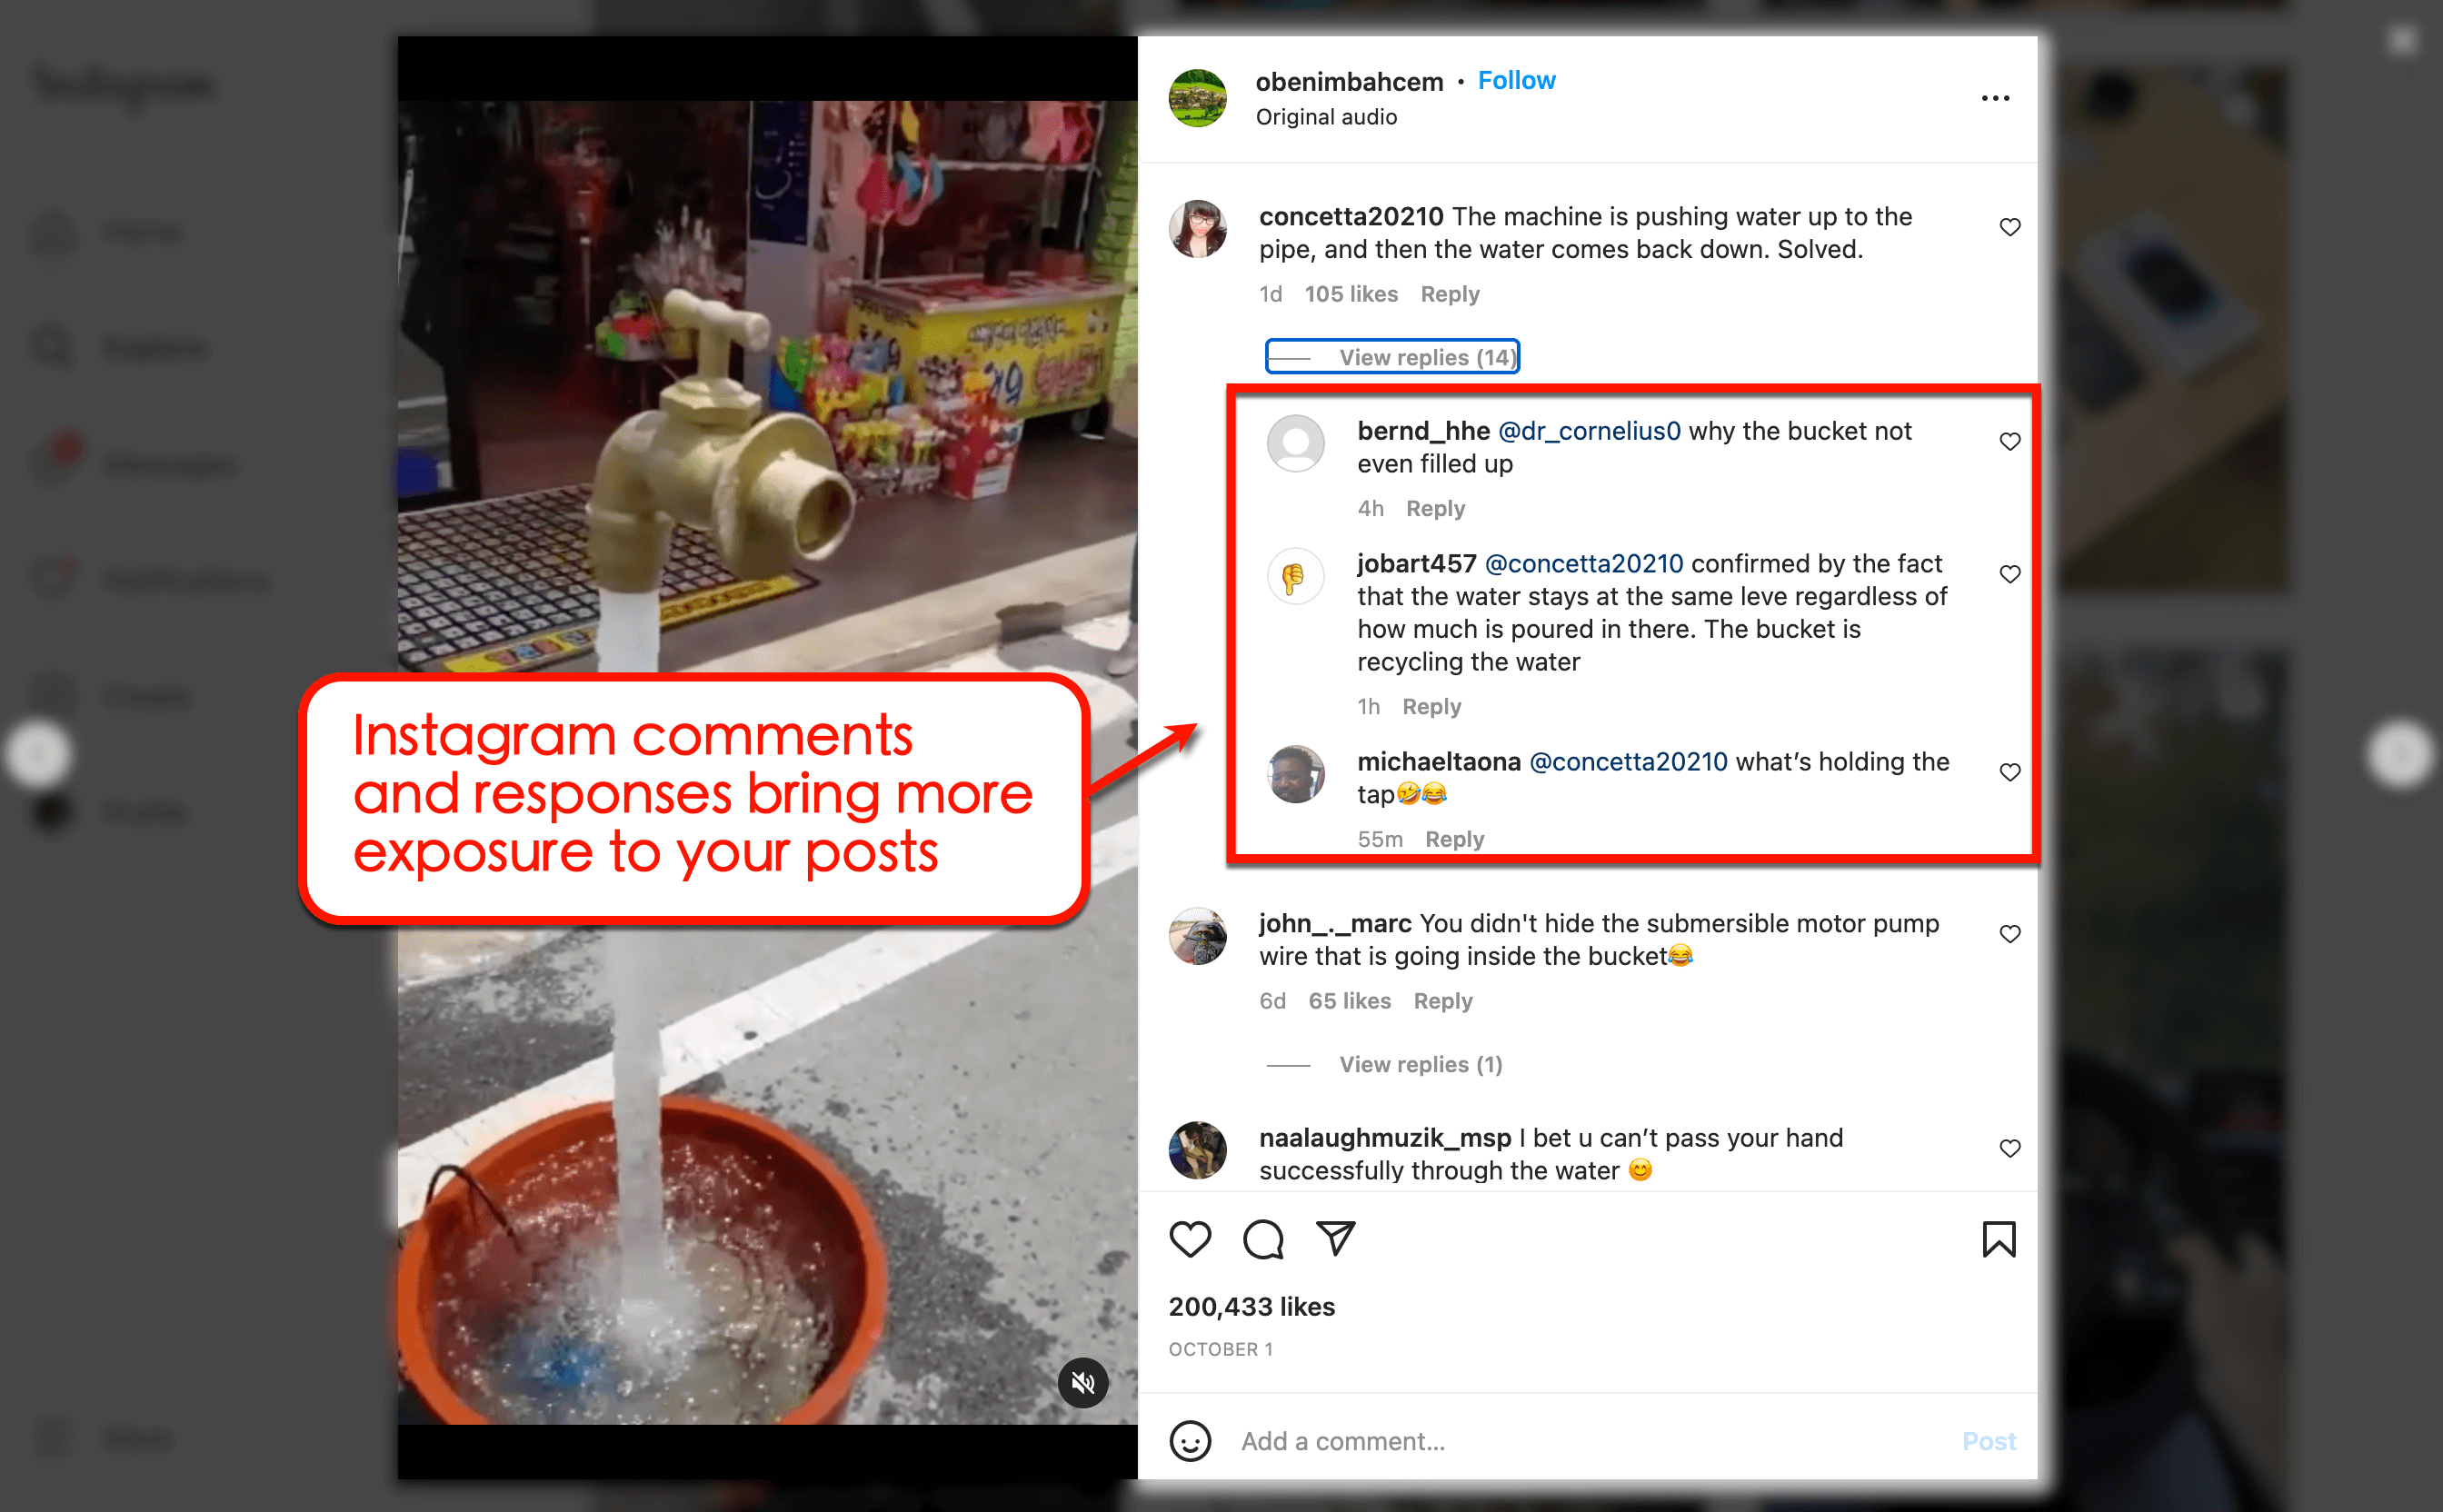 Instagram’s comments and responses